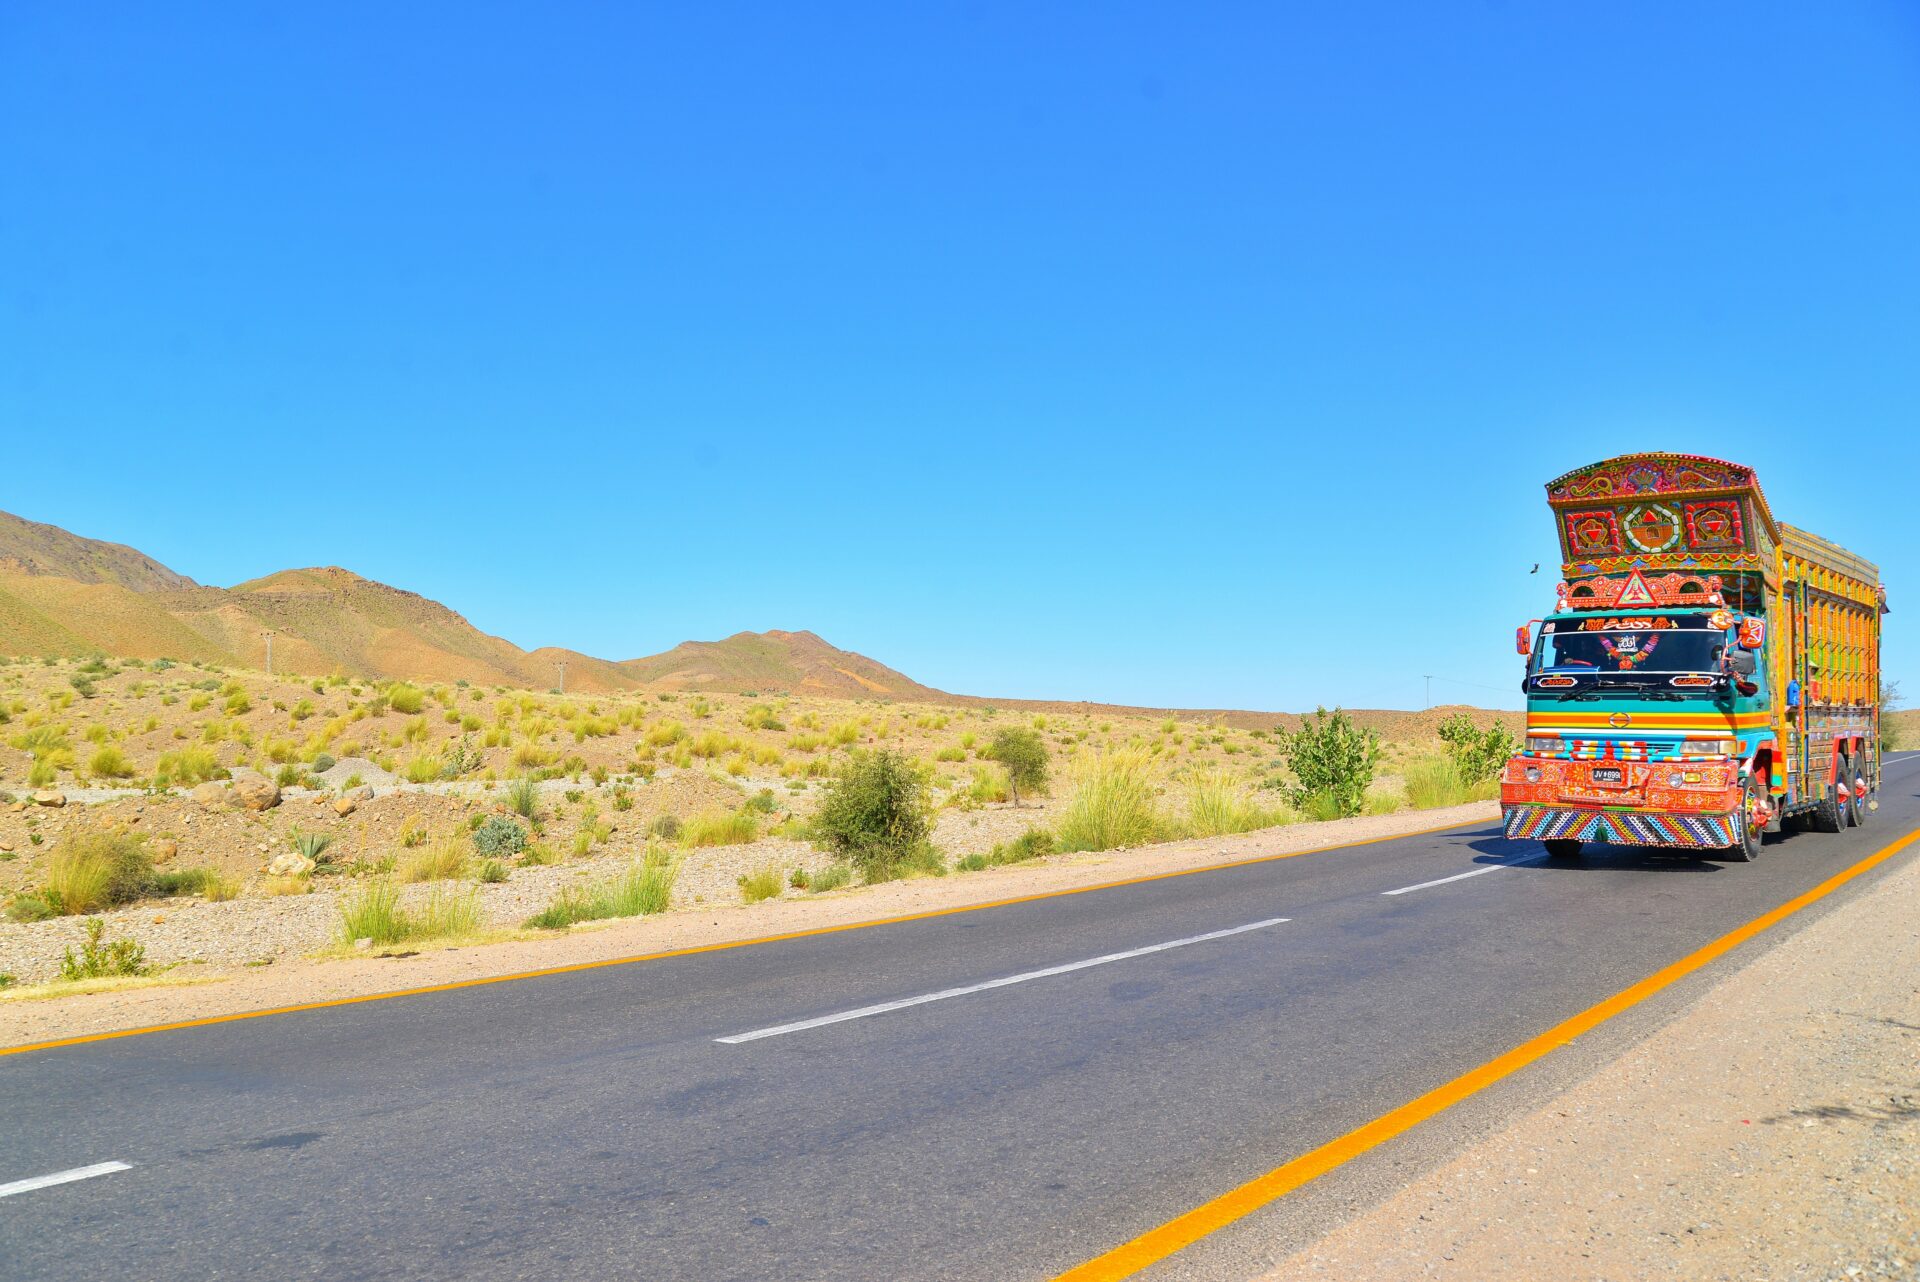 A truck travels along Balochistan Road, in Pakistan, in a photo published in October 2020 (Muneer Ahmed Ok via Unsplash)